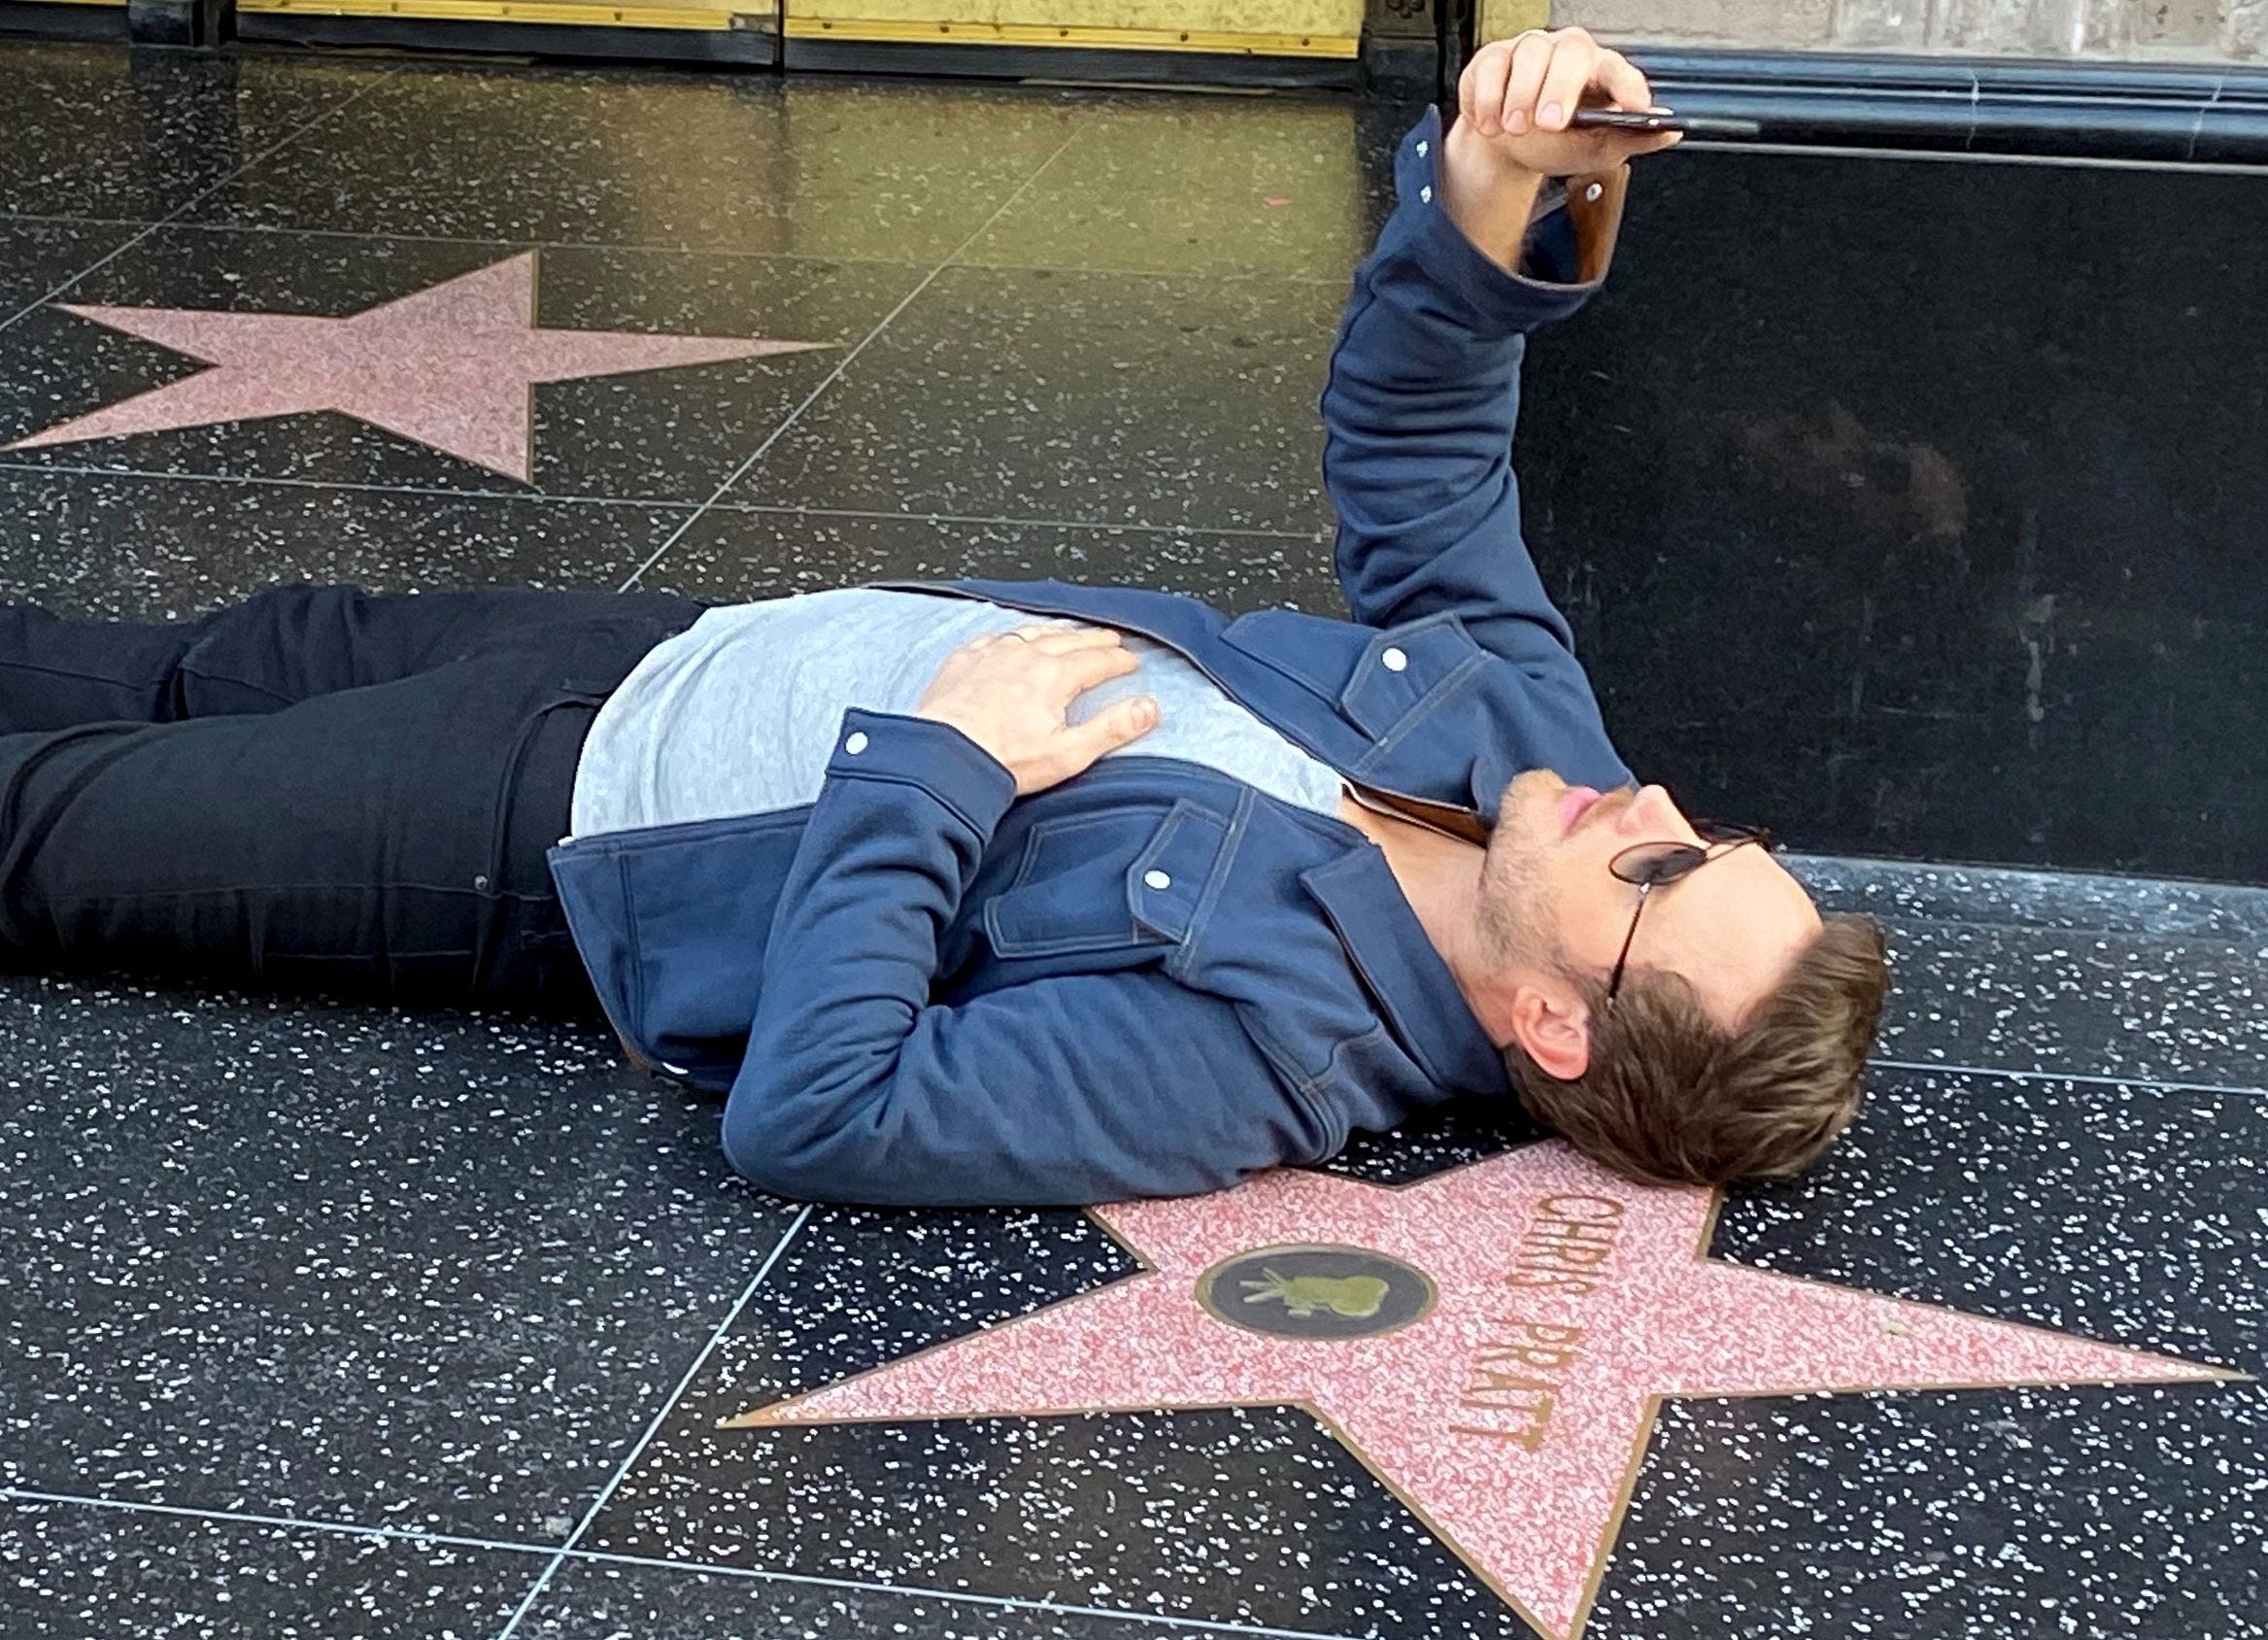 Chris Pratt wanted a selfie with his star before the premiere of "Onward" on February 18, 2020. He got his star in August 2017.